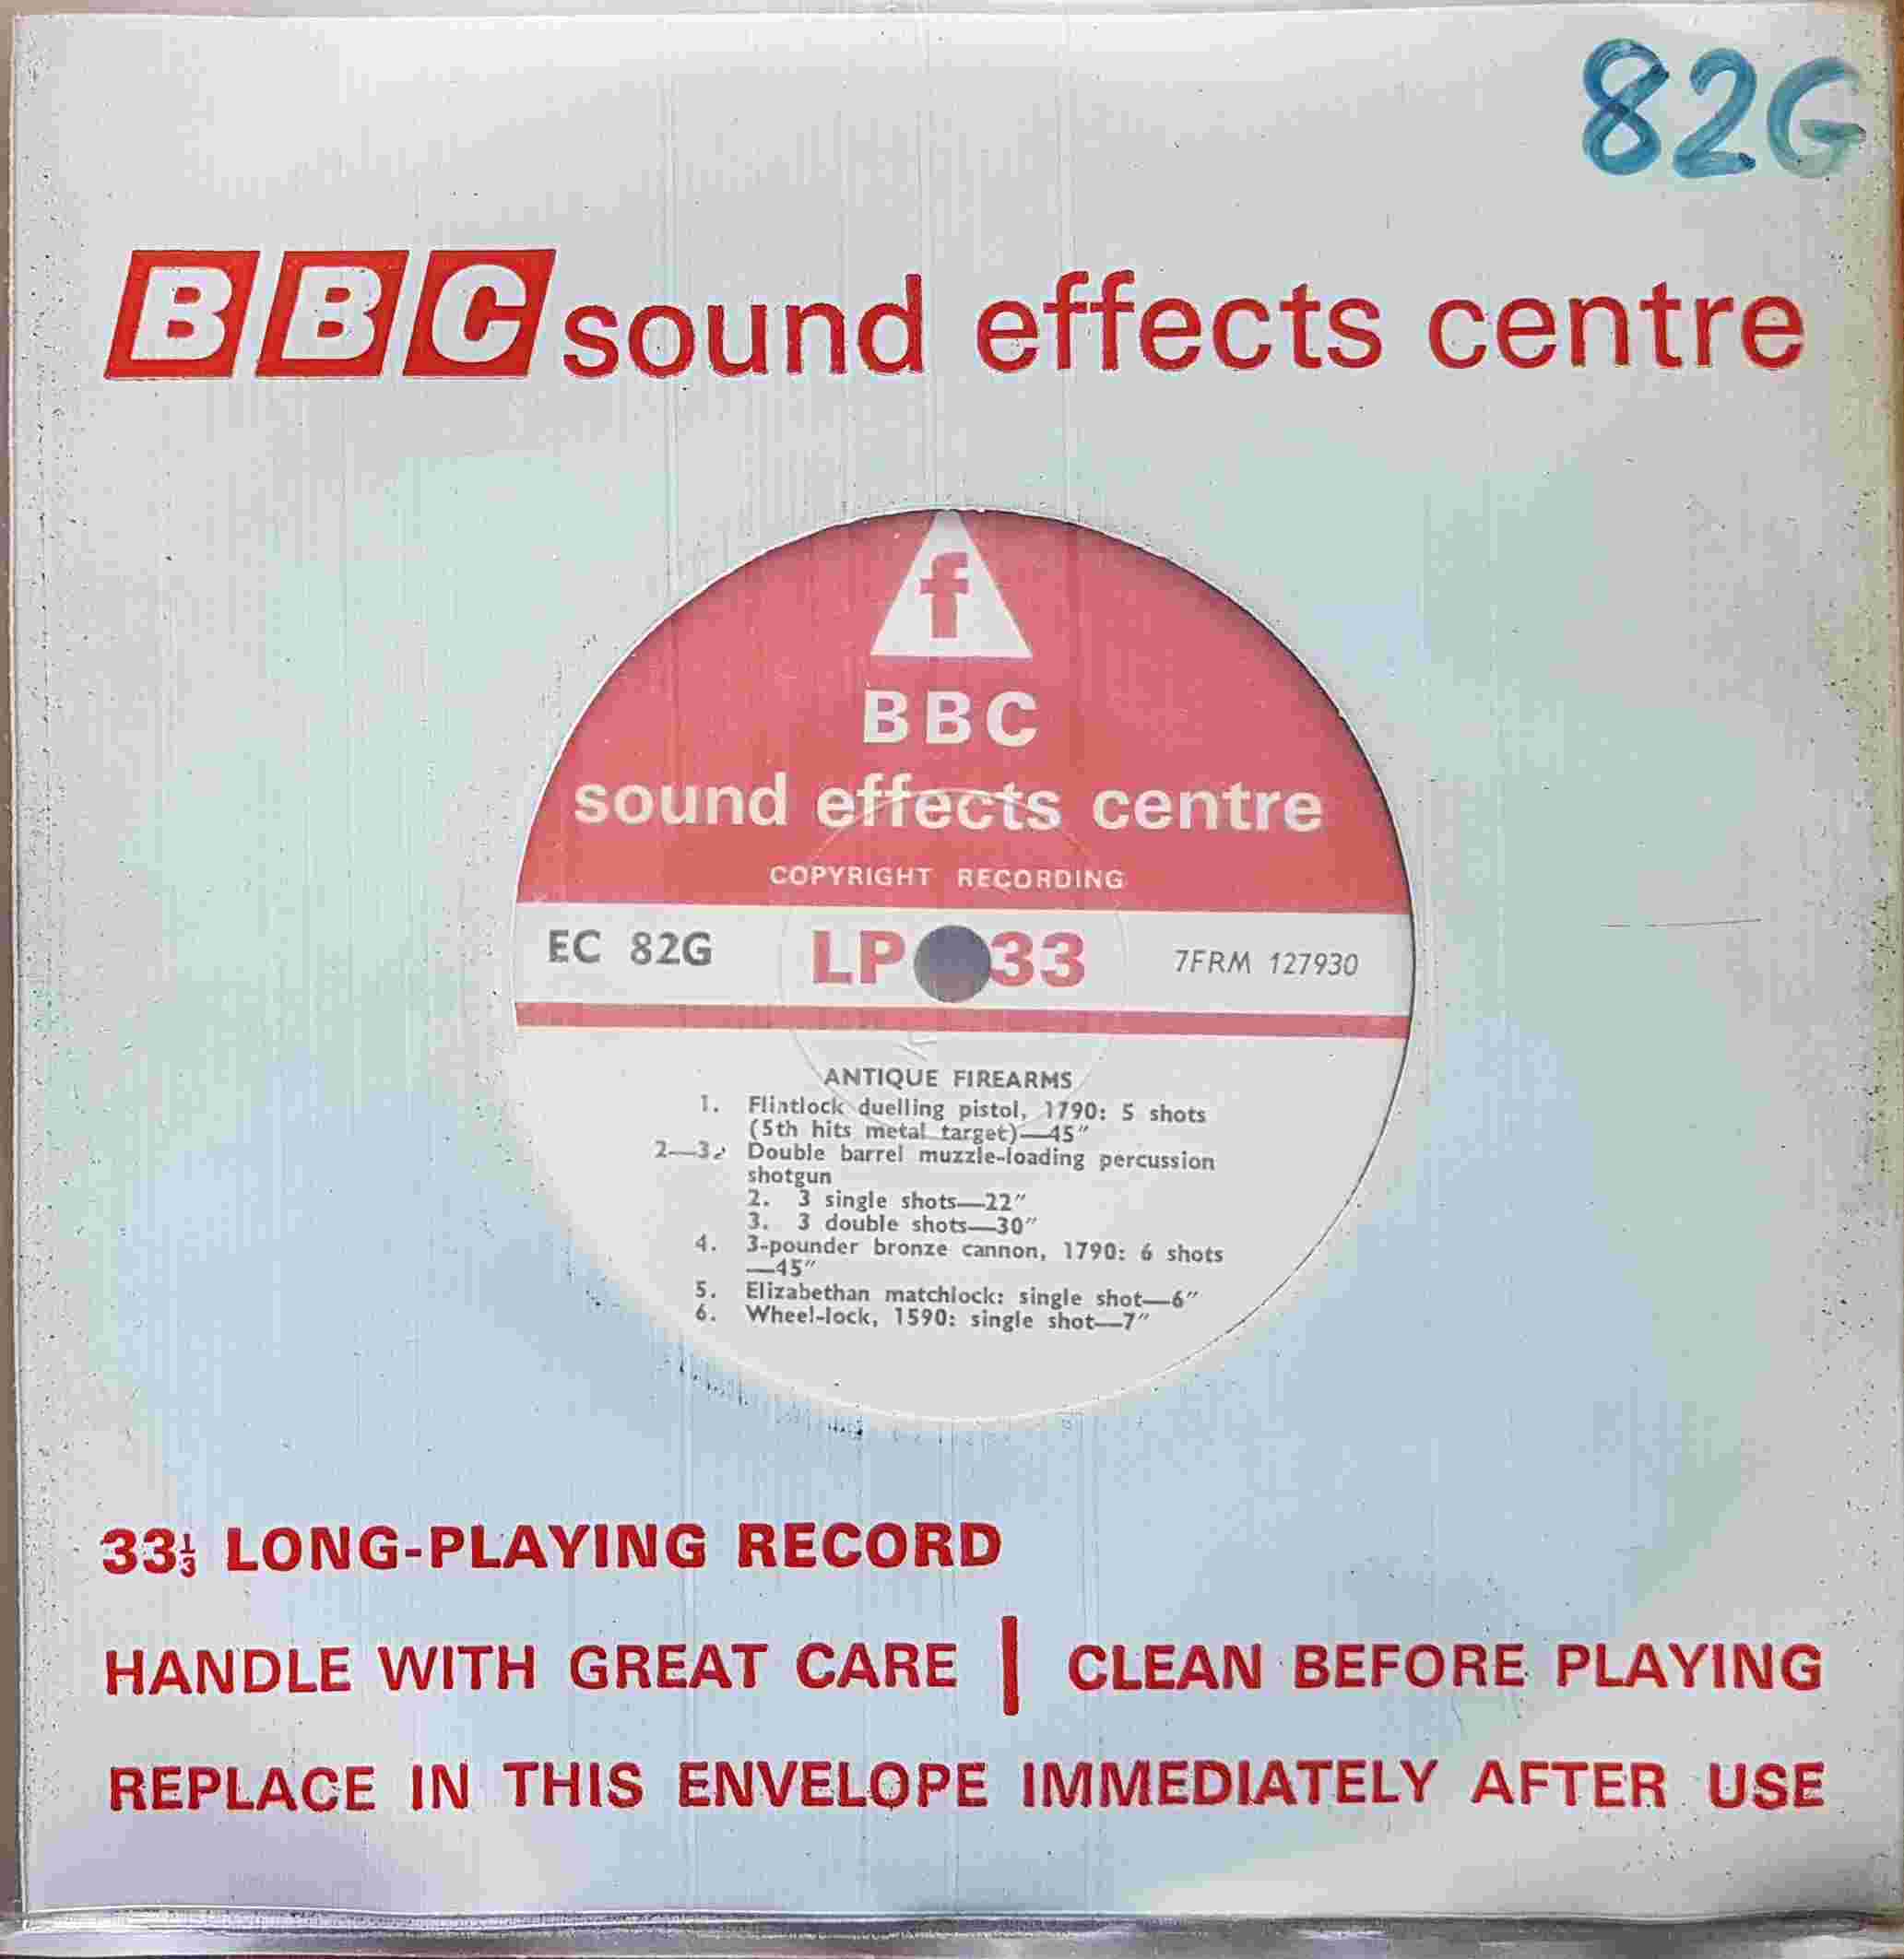 Picture of EC 82G Antique firearms by artist Not registered from the BBC singles - Records and Tapes library